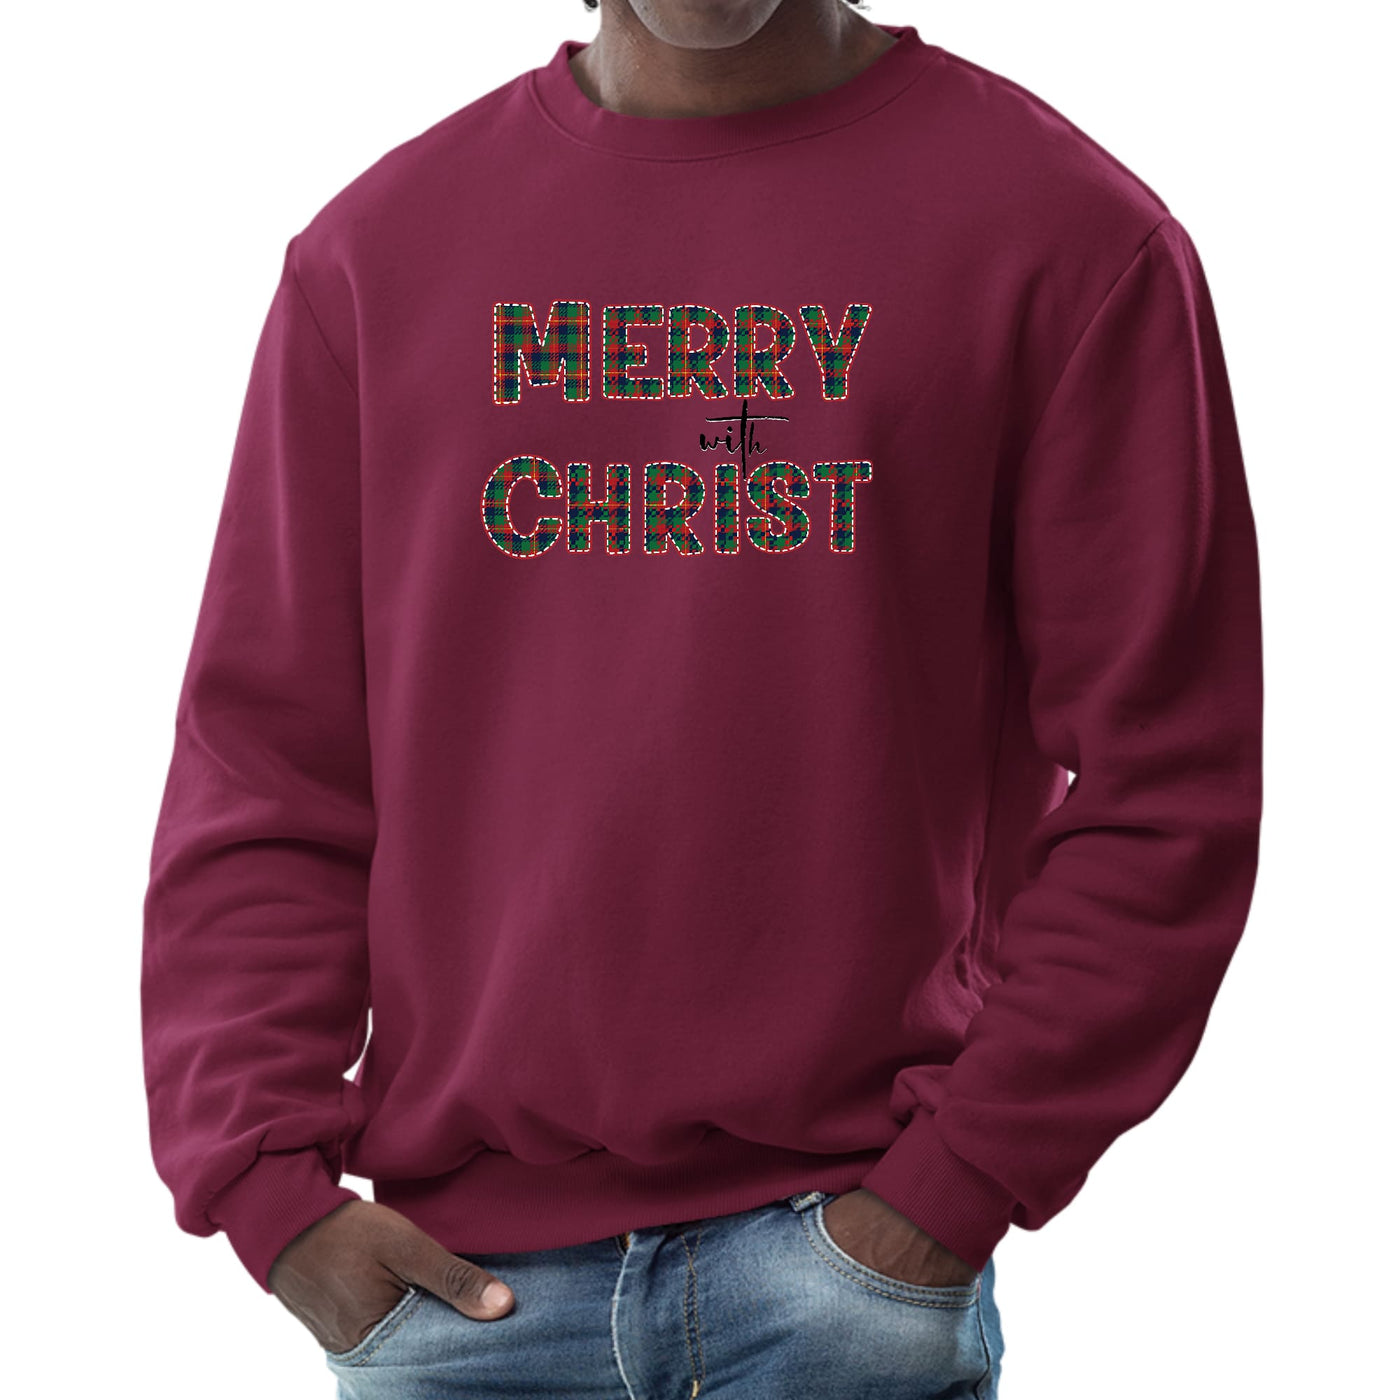 Mens Graphic Sweatshirt Merry With Christ Red And Green Plaid - Sweatshirts